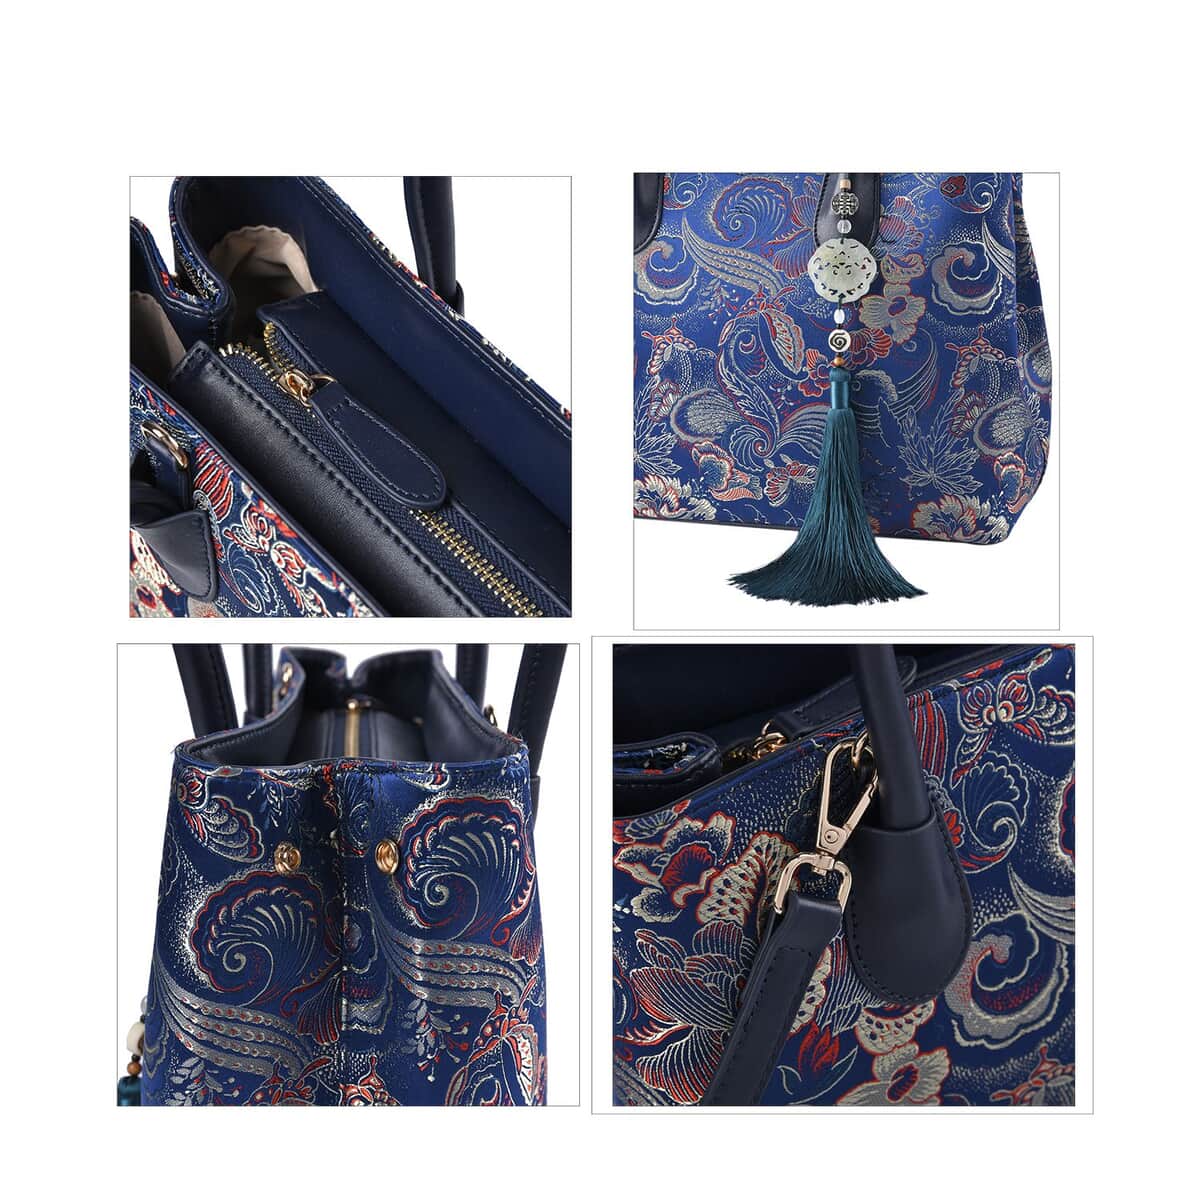 Navy Phoenix tail Flower Pattern Brocade with Genuine Leather Crossbody Bag (12.91"x9.84"x5.51") with Shoulder Strap image number 4